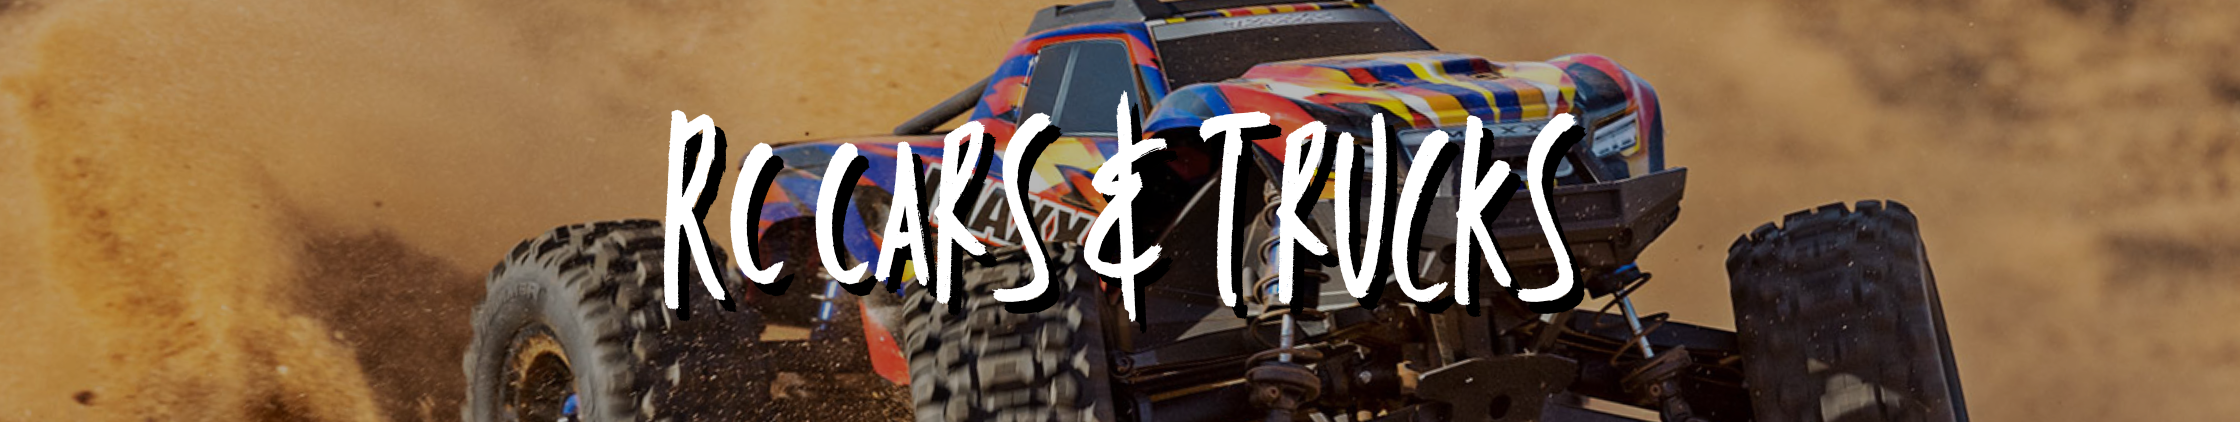 Your one-stop hobby shop for RC Cars and Trucks, based out of our brick and mortar shop in Victoria BC. We ship Canada-Wide with flare rate shipping and offer a loyalty program with lots of rewards and benefits to help you get over any hobby hurdle!